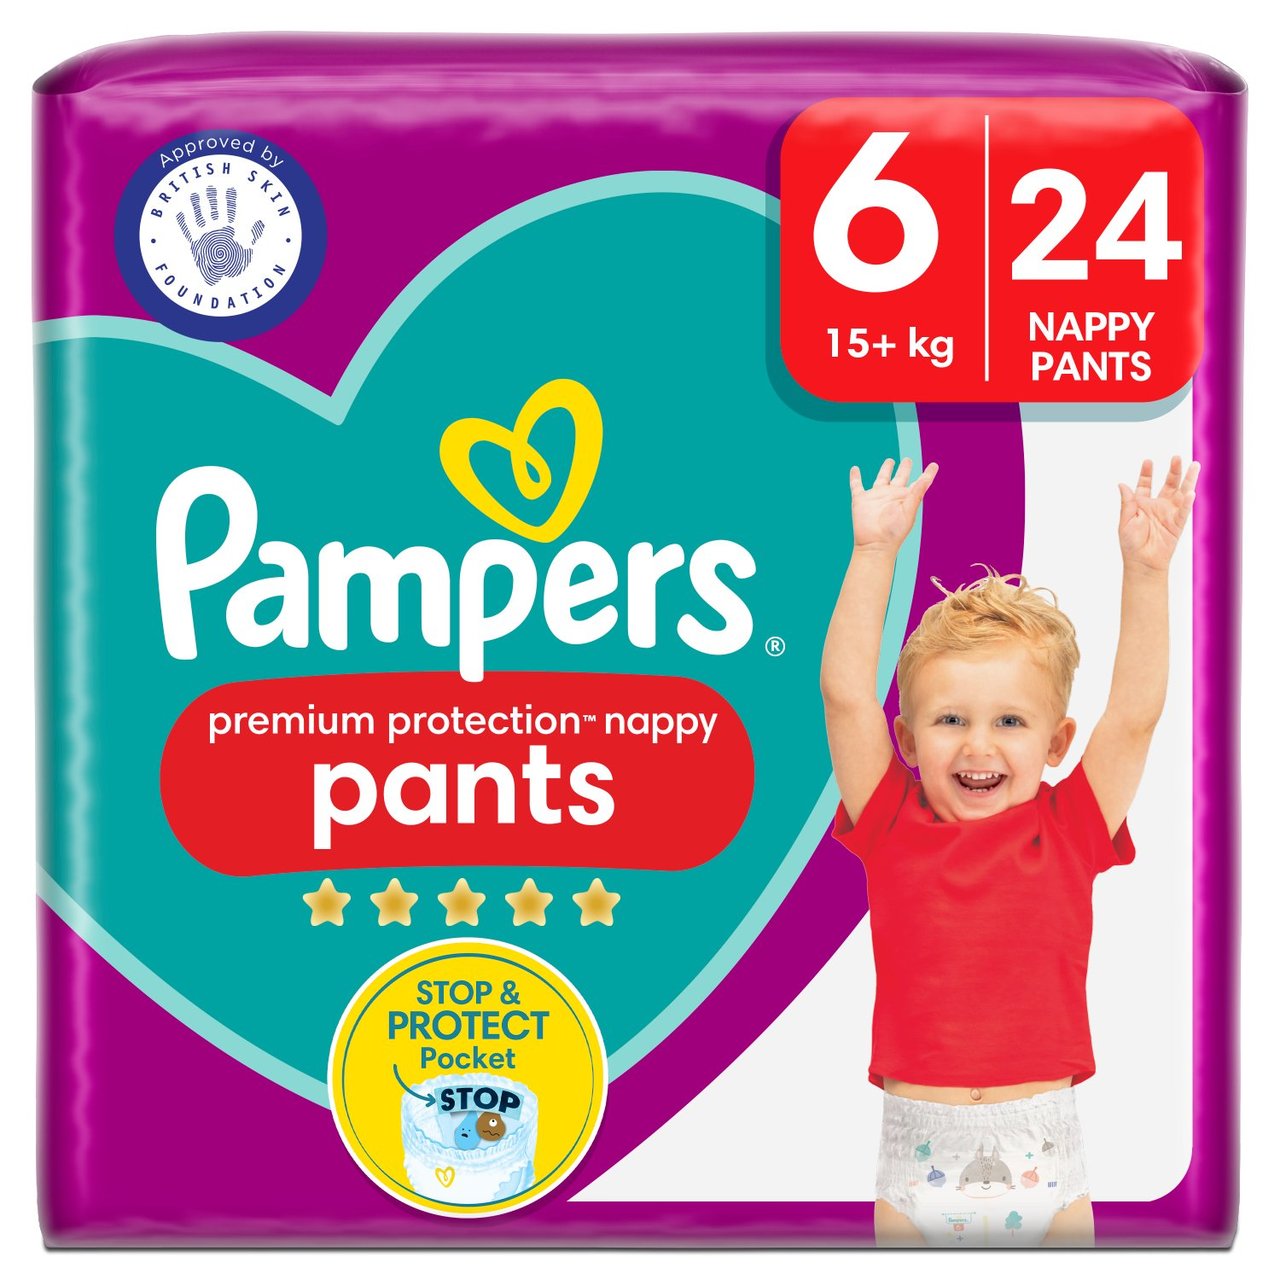 Pampers Premium Protection Nappy Pants Size 6, 24 Nappies 15+kg